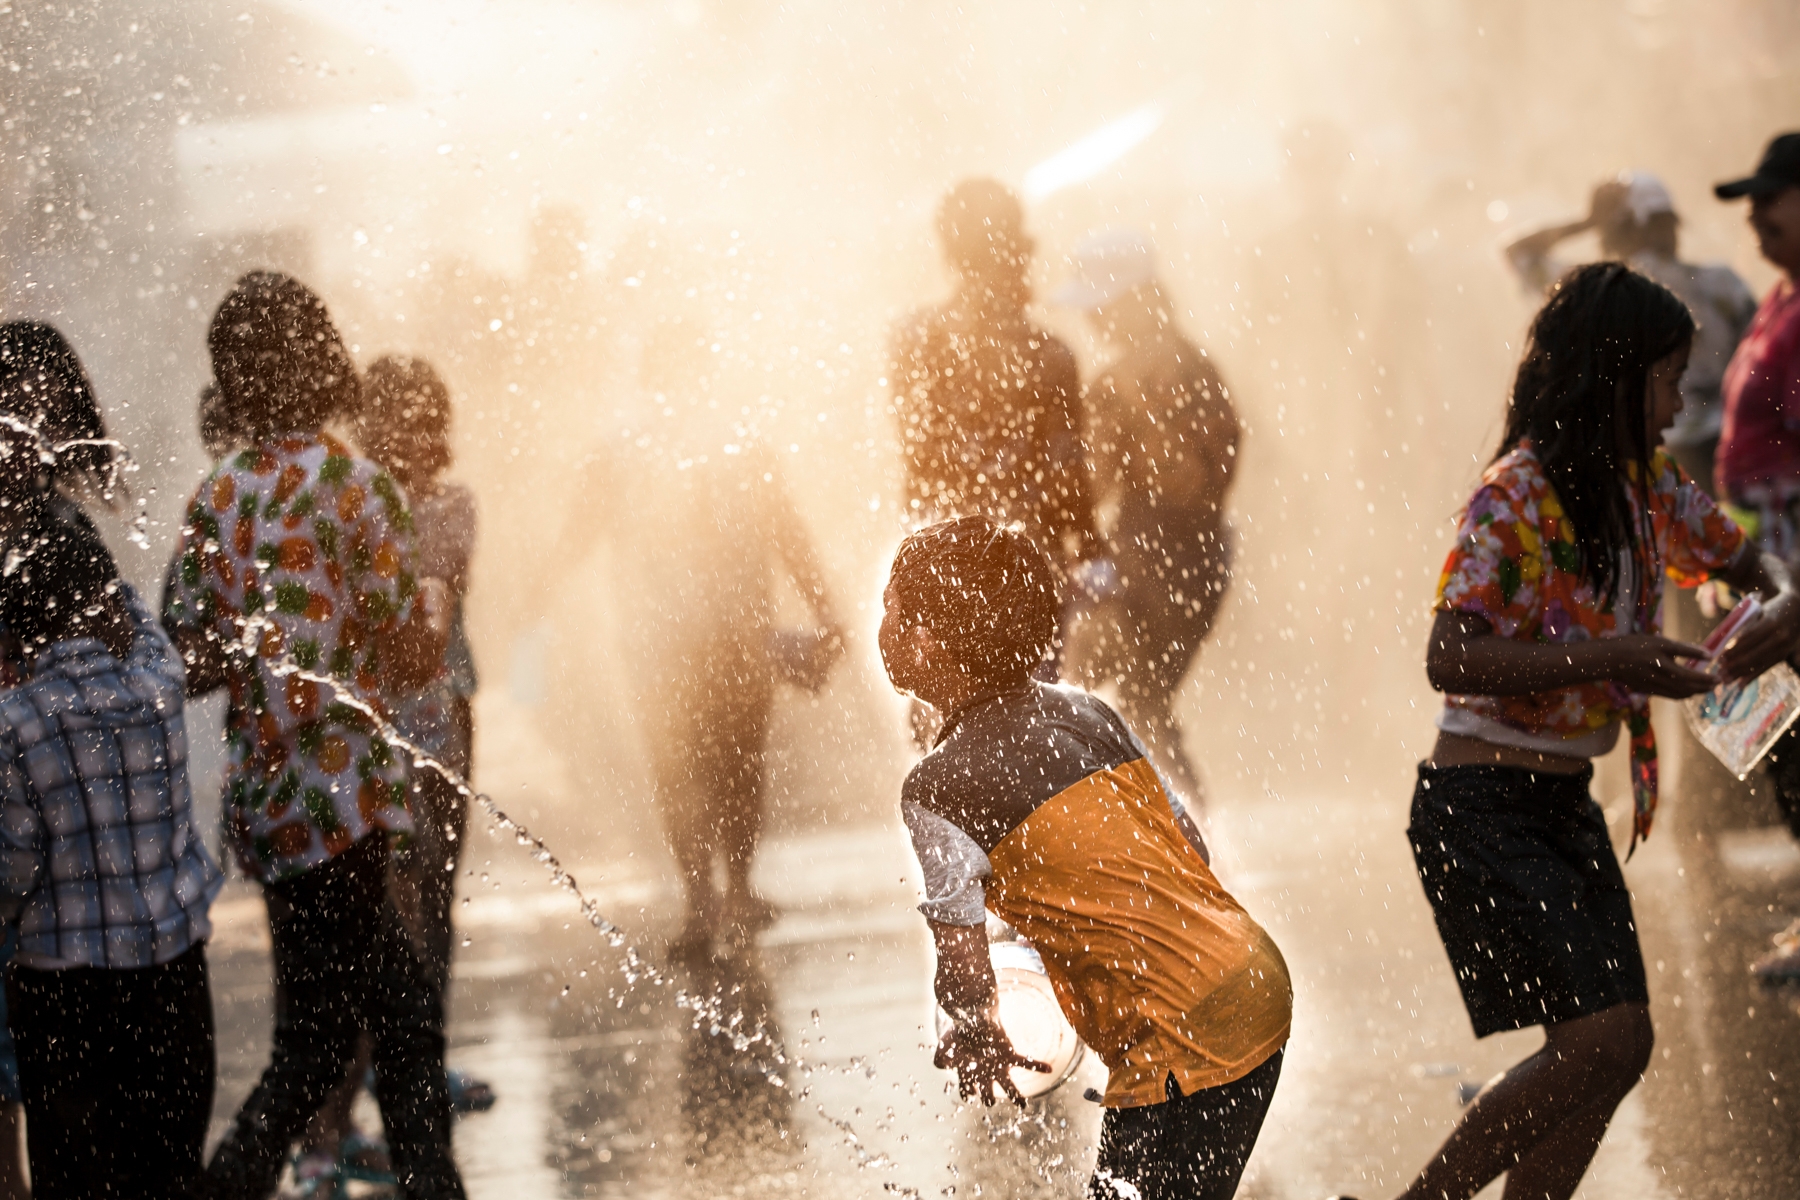 Have a joyful experience while taking in the splash of water on the streets of Bangkok